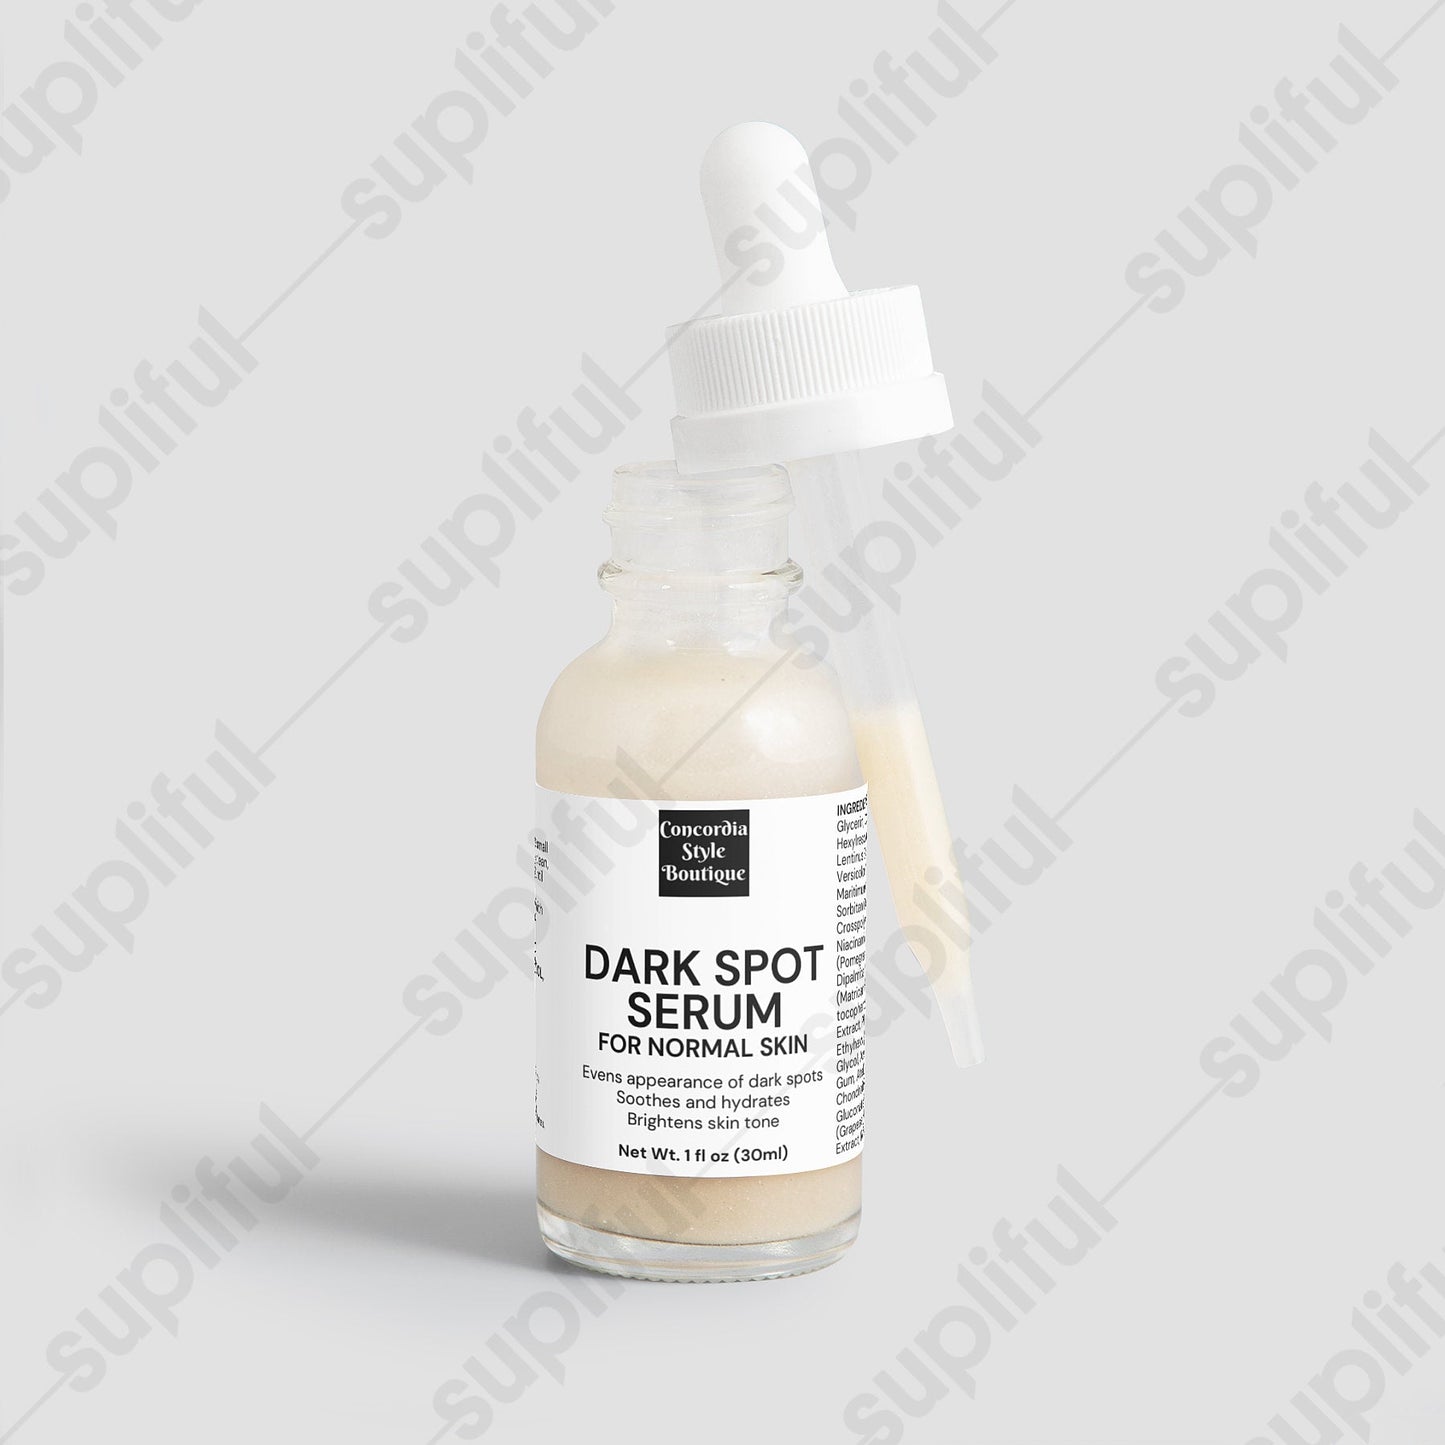 Dark Spot Serum for Normal Skin - Ships exclusively to US - Premium Dark Spot Serum for Normal Skin from Concordia Style Boutique - Just $19.85! Shop now at Concordia Style Boutique